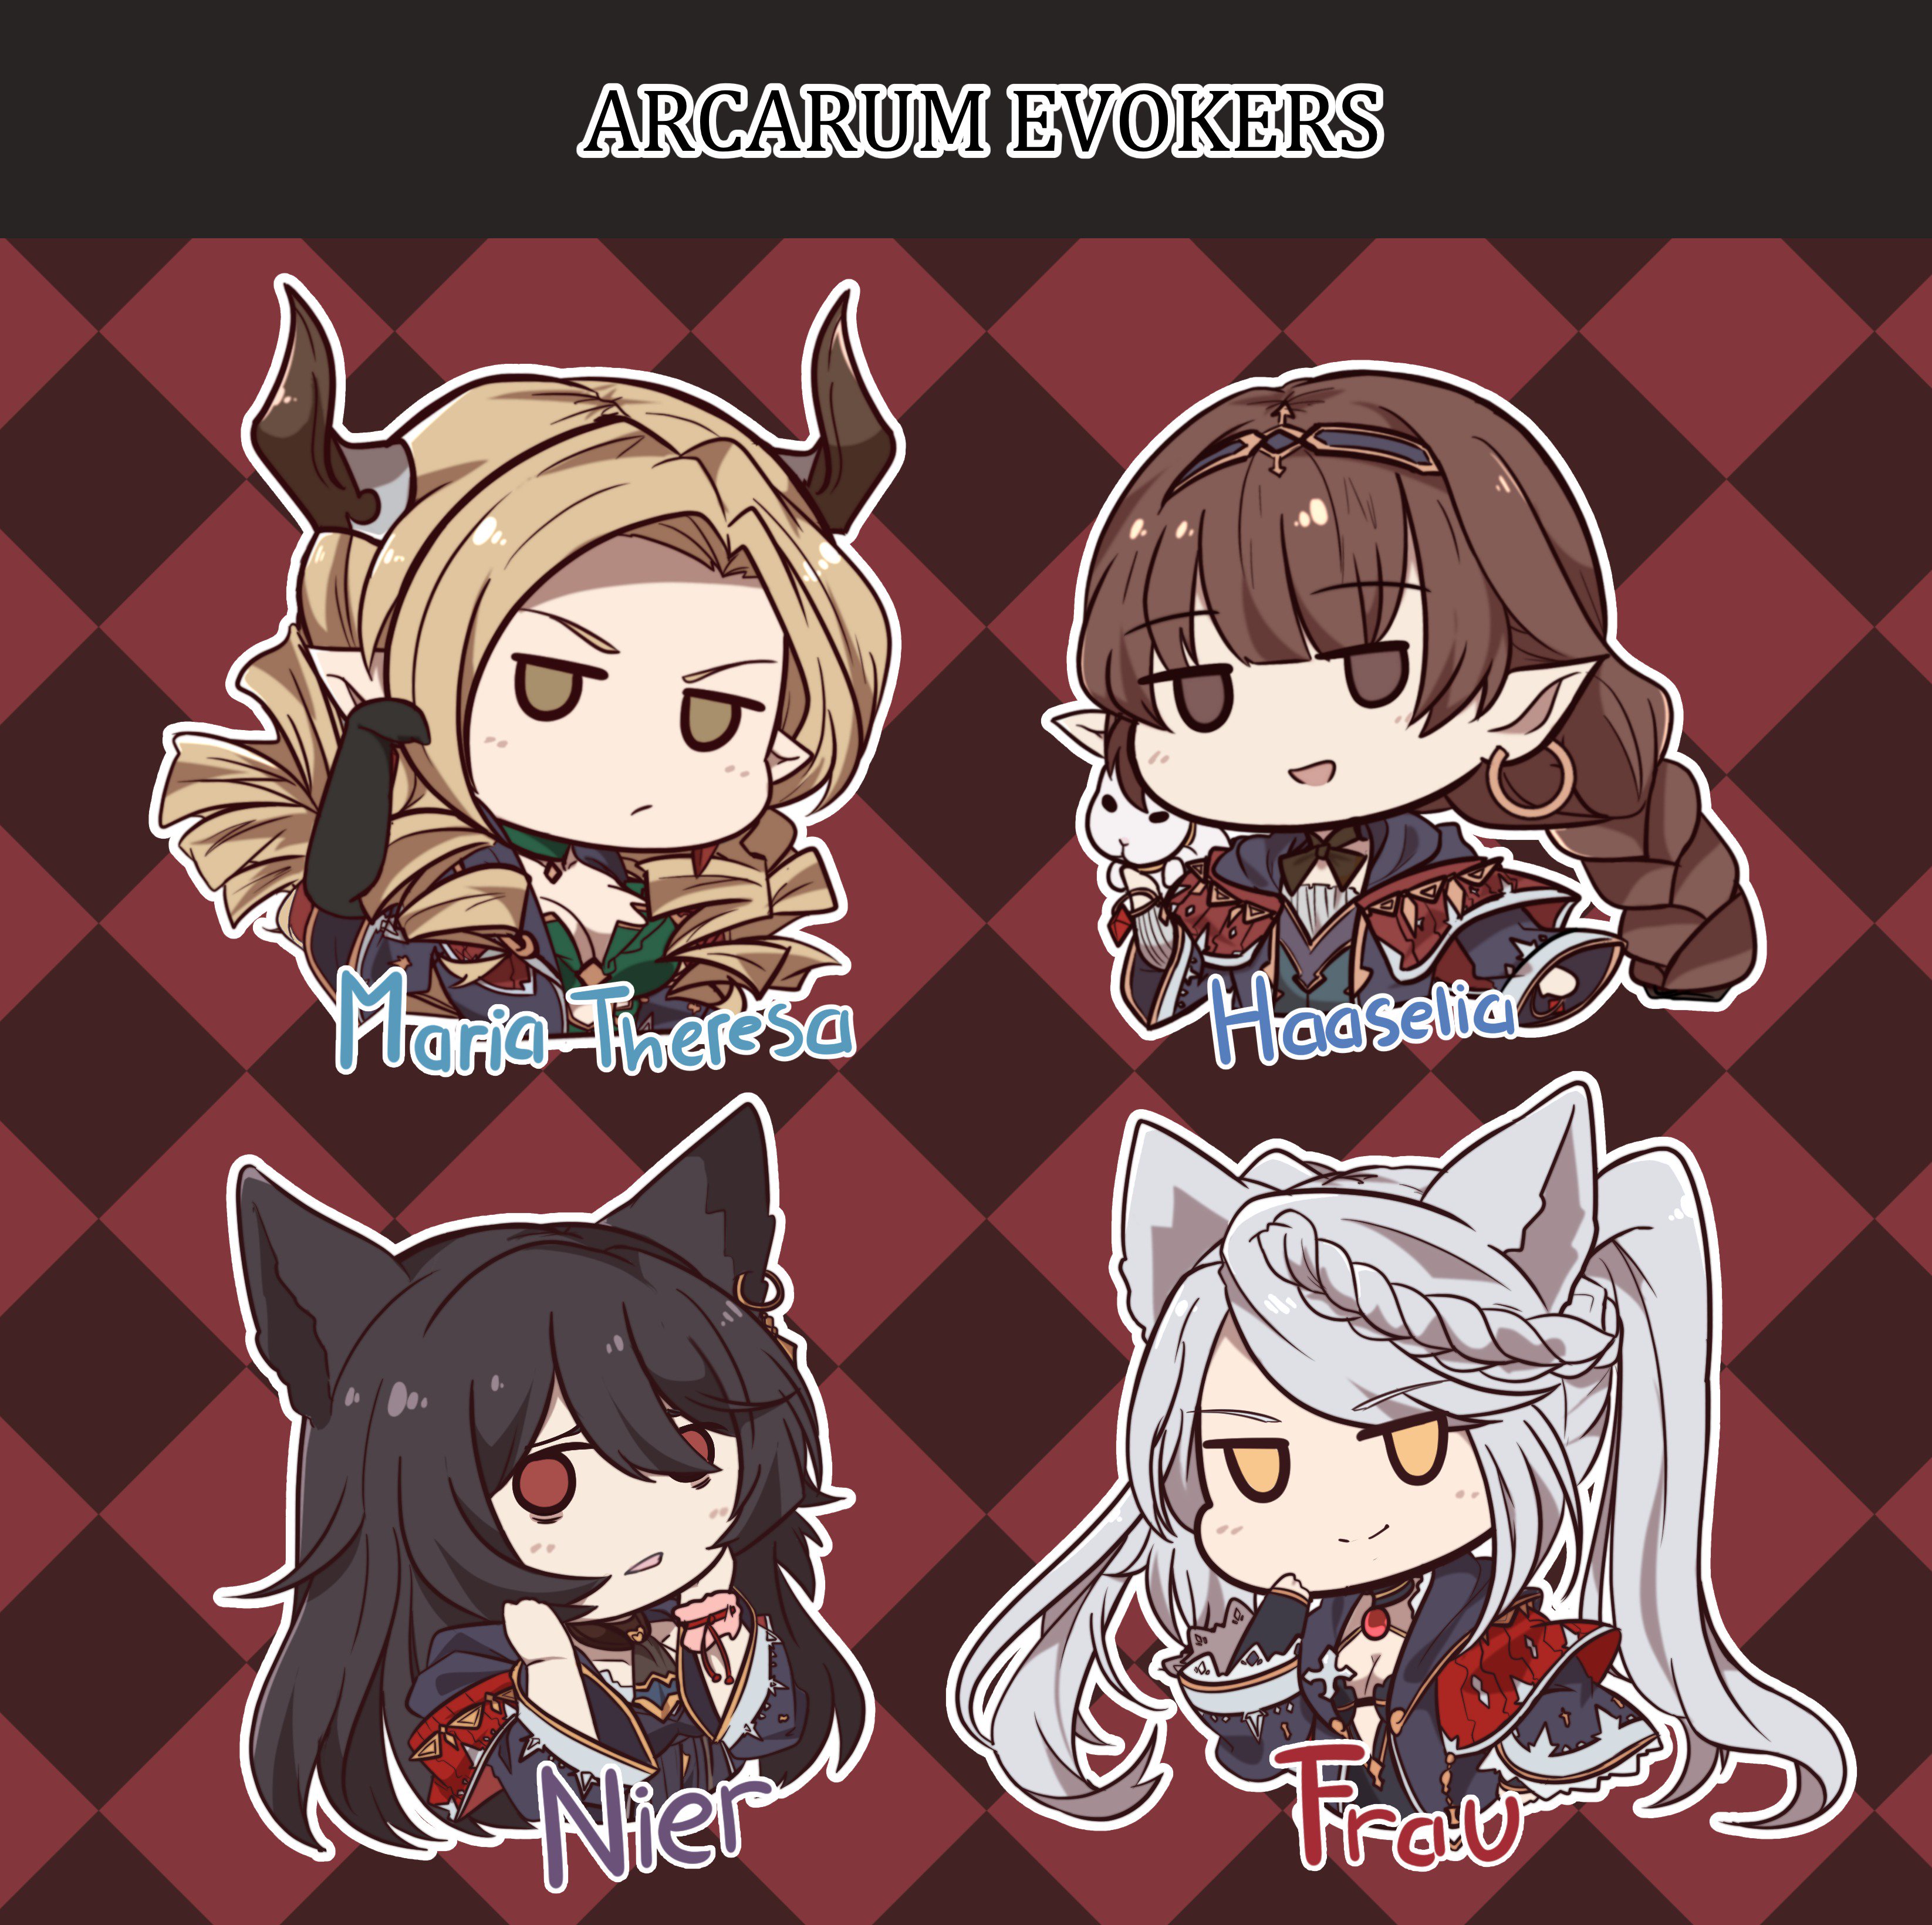 Cheschorv Busy Female Arcarum Evokers Available As A Stickers Genfest Itb This Week フラウ ニーア マリア テレサ ハーゼリーラ グラブル T Co 508hi99djm Twitter